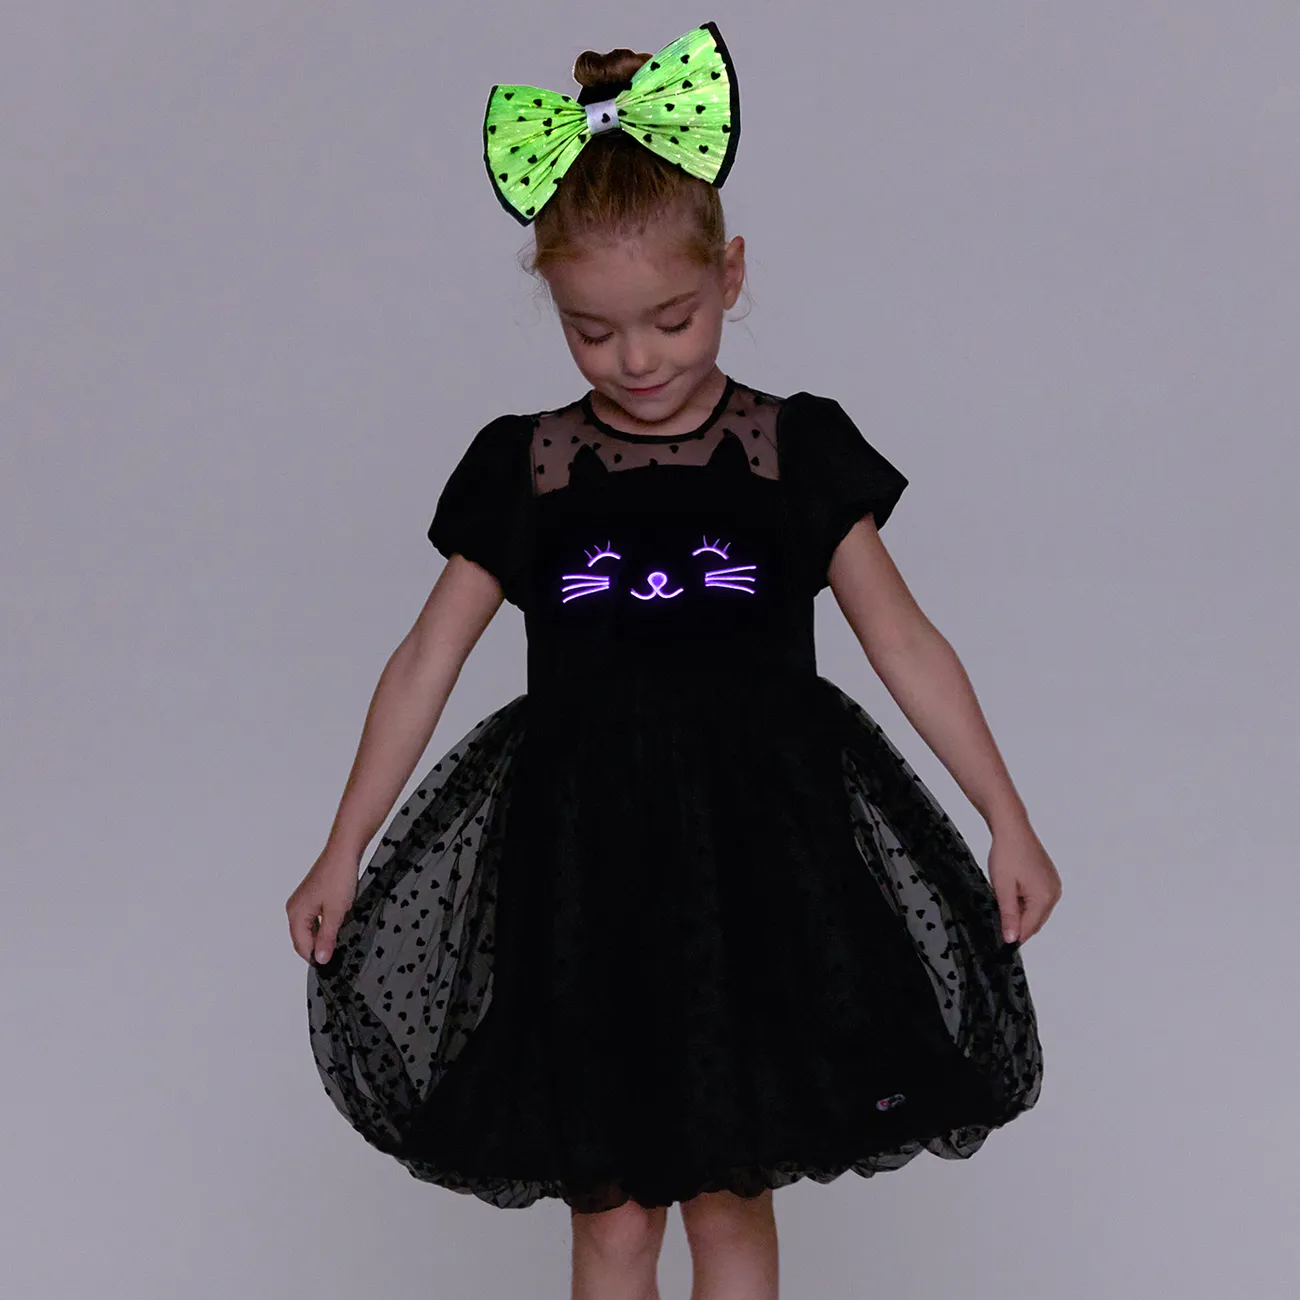 Go-Glow Illuminating Toddler Dress with Light Up Cat Pattern Including Controller (Battery Inside) Black big image 1